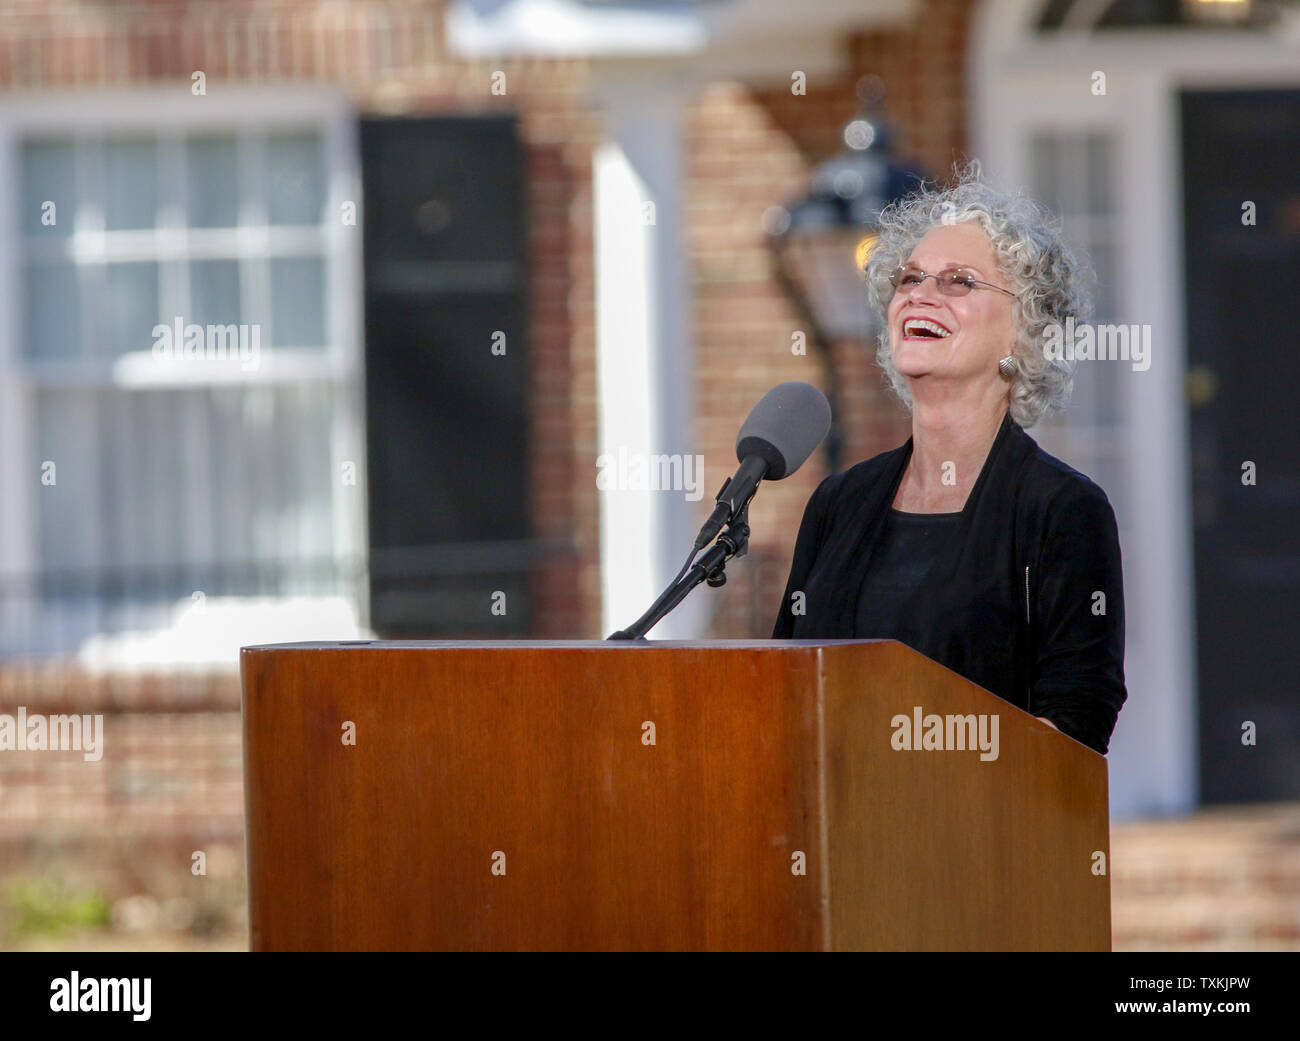 Ruth Graham, daughter of Rev. Billy Graham, speaks at the evangelist's funeral at the Billy Graham Library in Charlotte, North Carolina on March 2, 2018. Billy Graham died February 21, 2018.  Photo by Nell Redmond/UPI Stock Photo